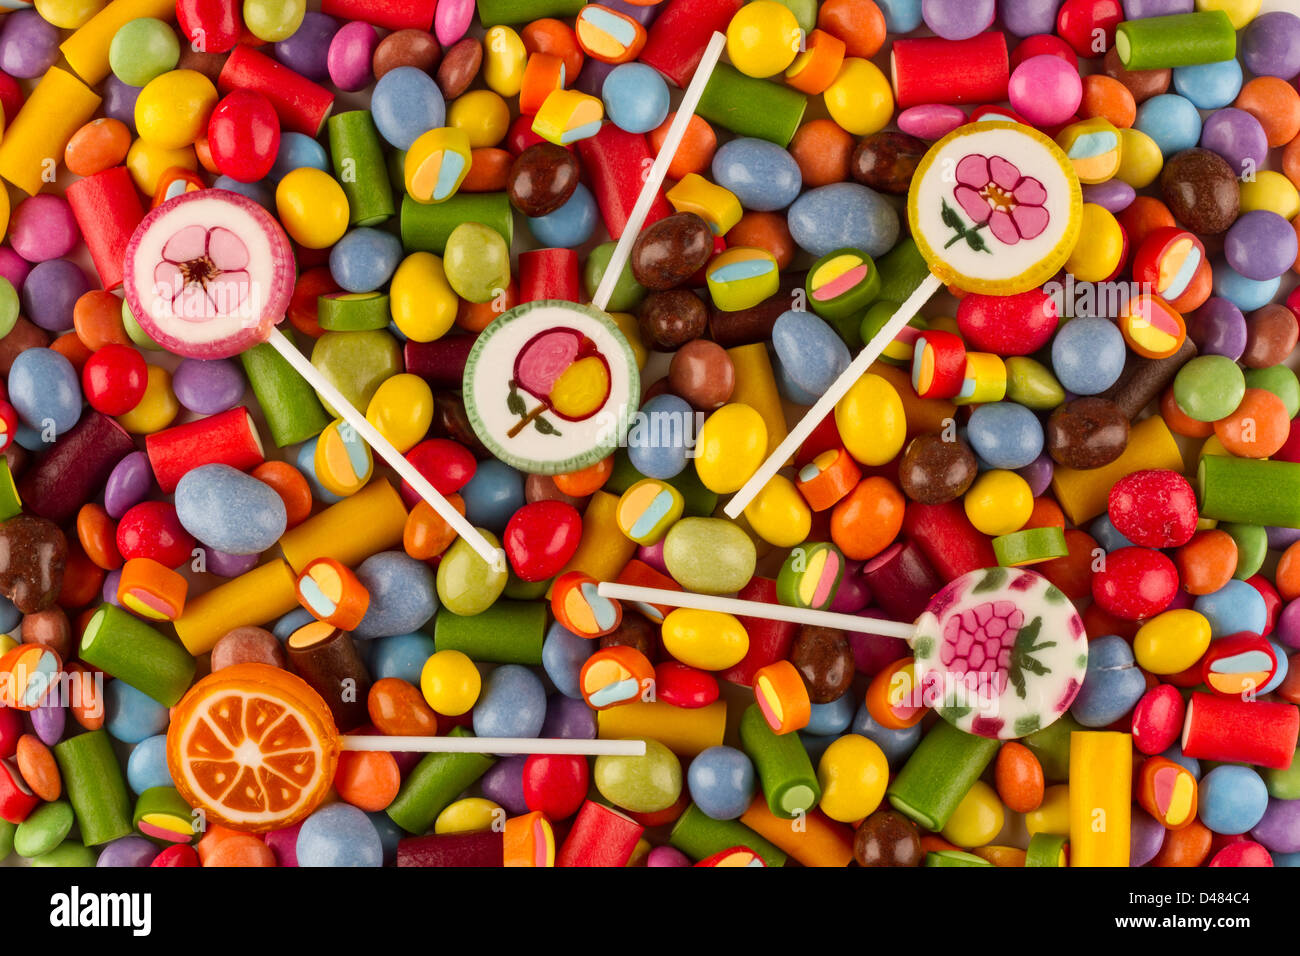 colorful candy on white background Stock Photo